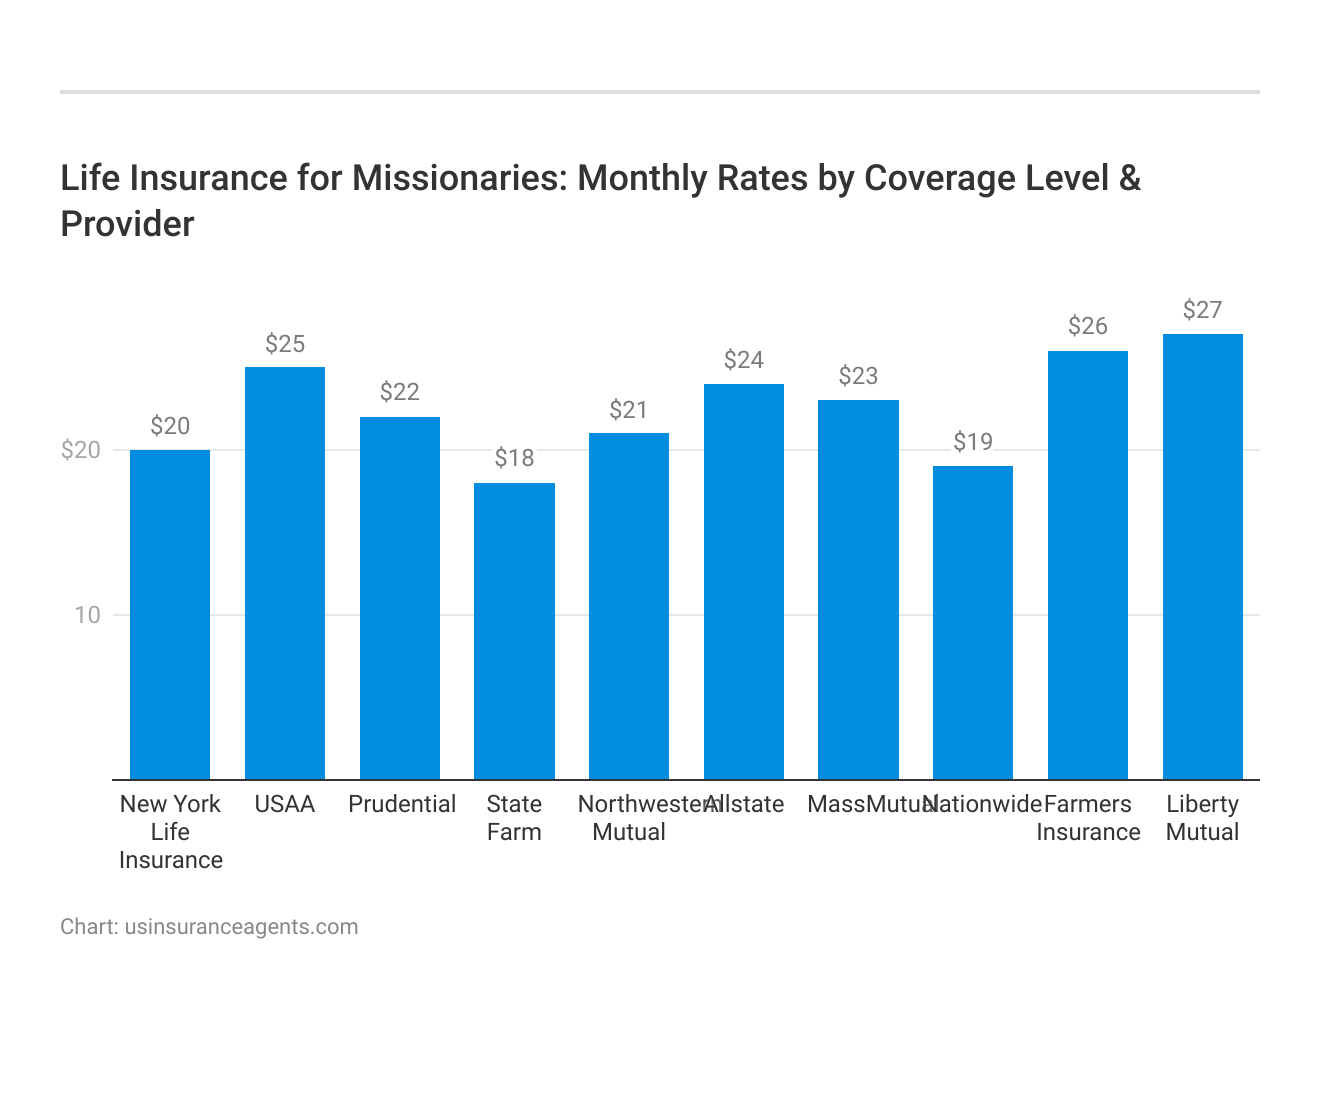 <h3>Life Insurance for Missionaries: Monthly Rates by Coverage Level & Provider</h3>